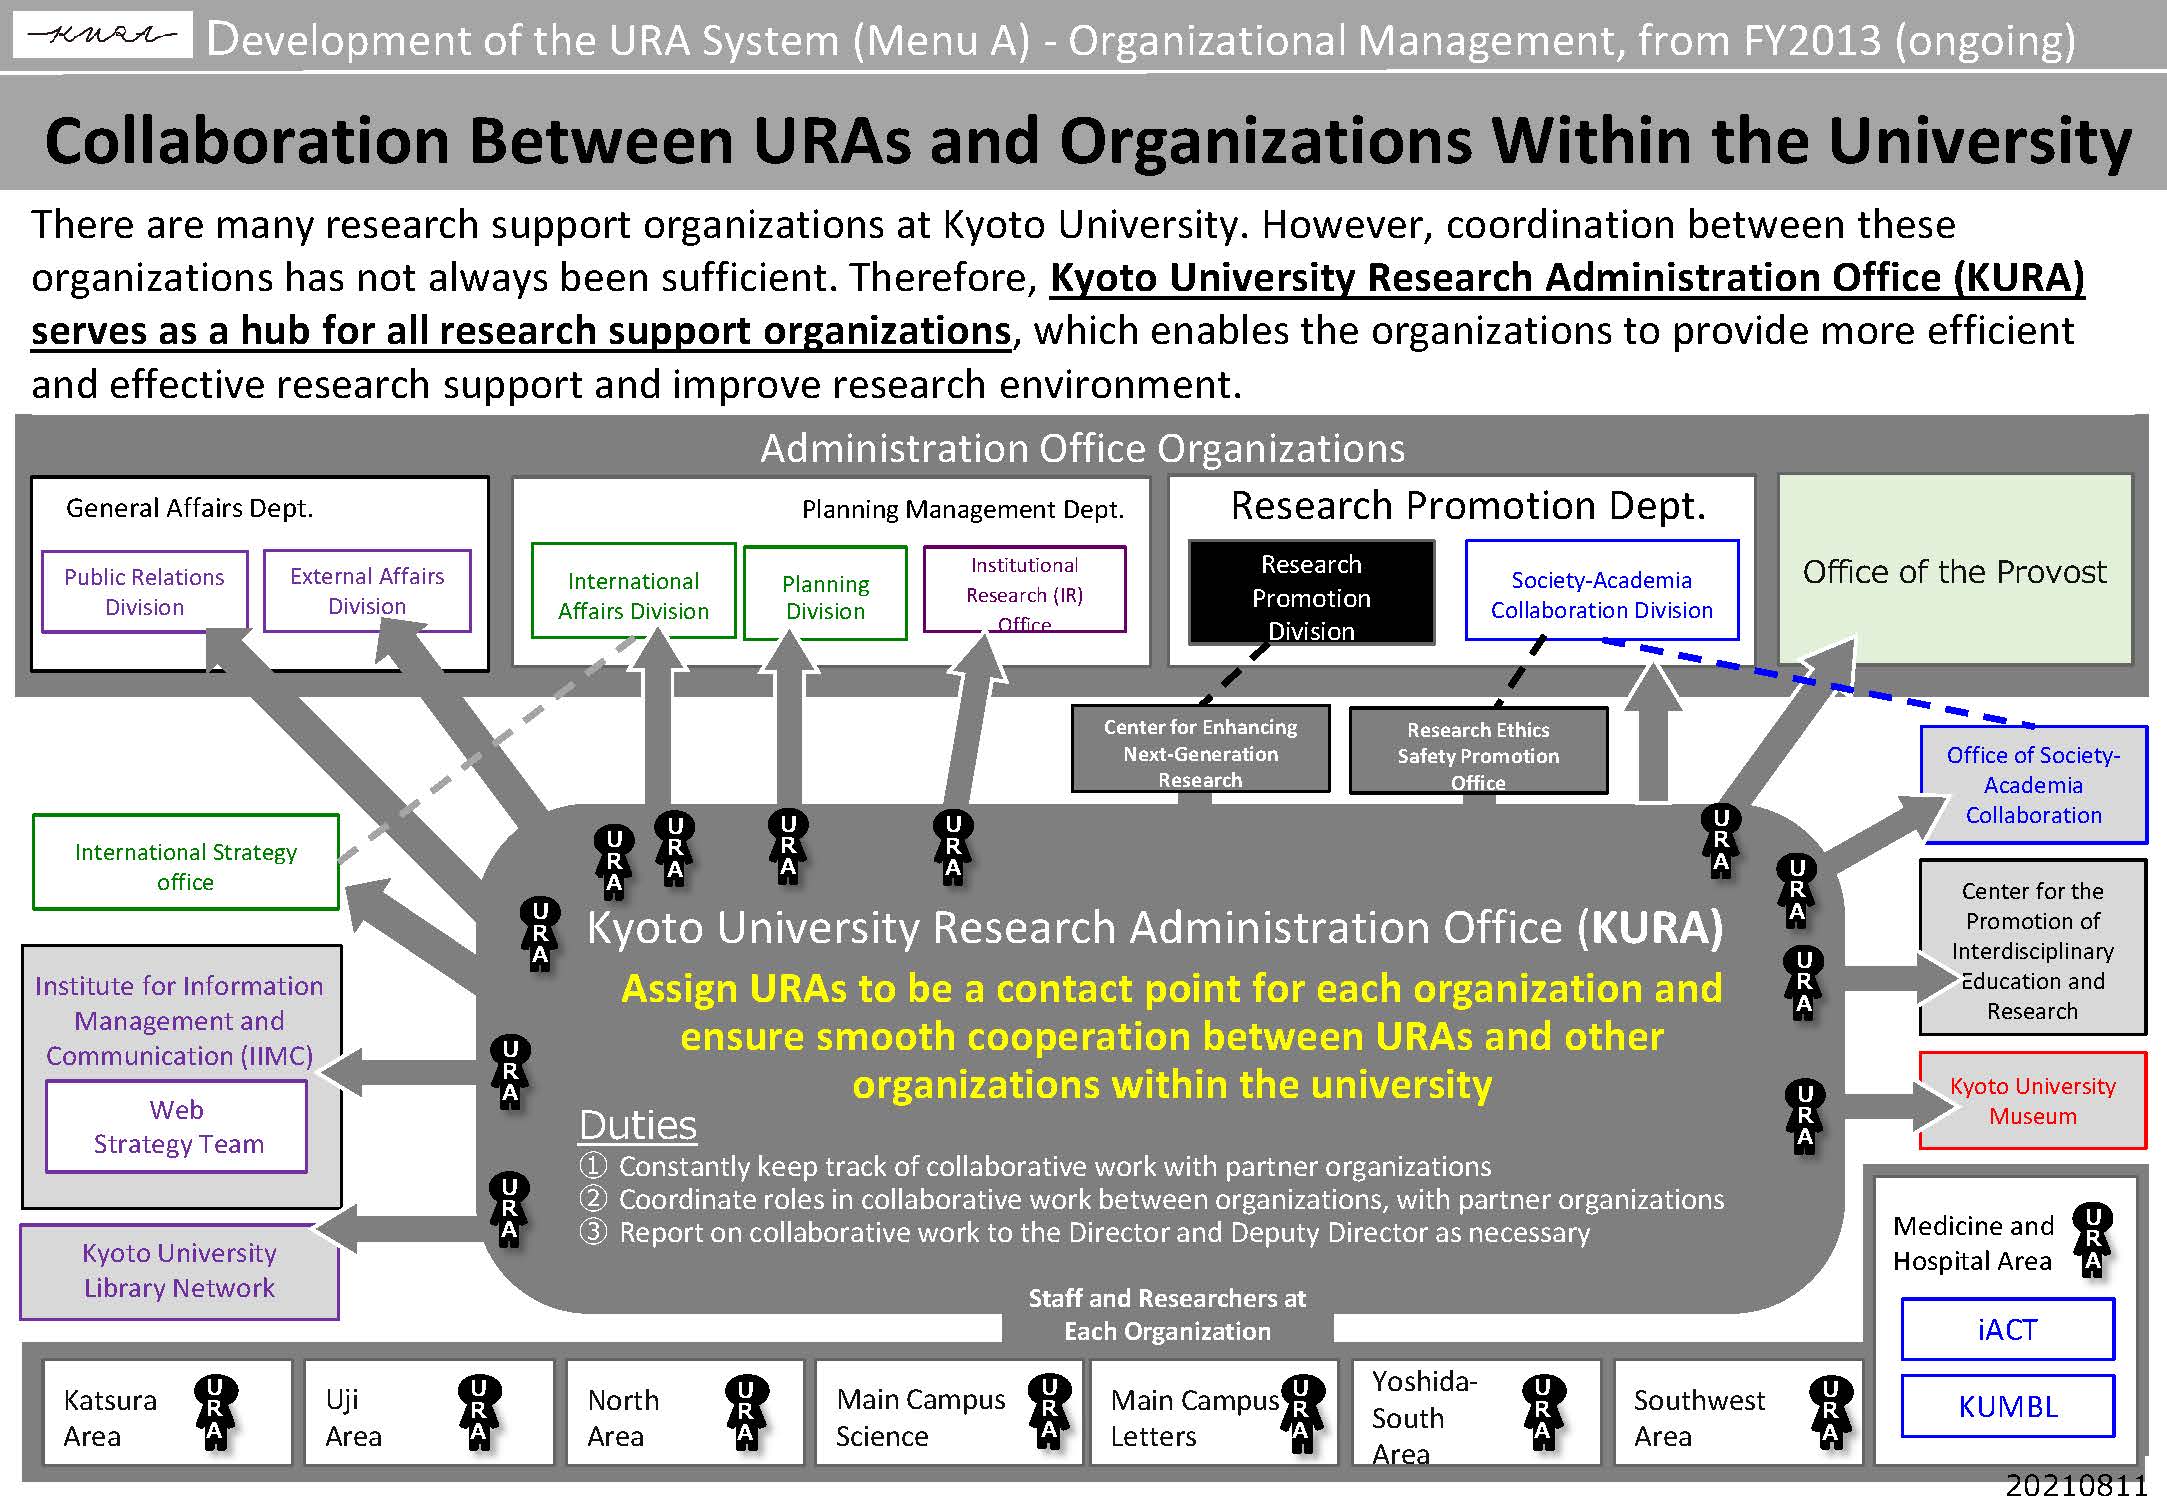 Collaboration Between URAs and Organizations Within the University